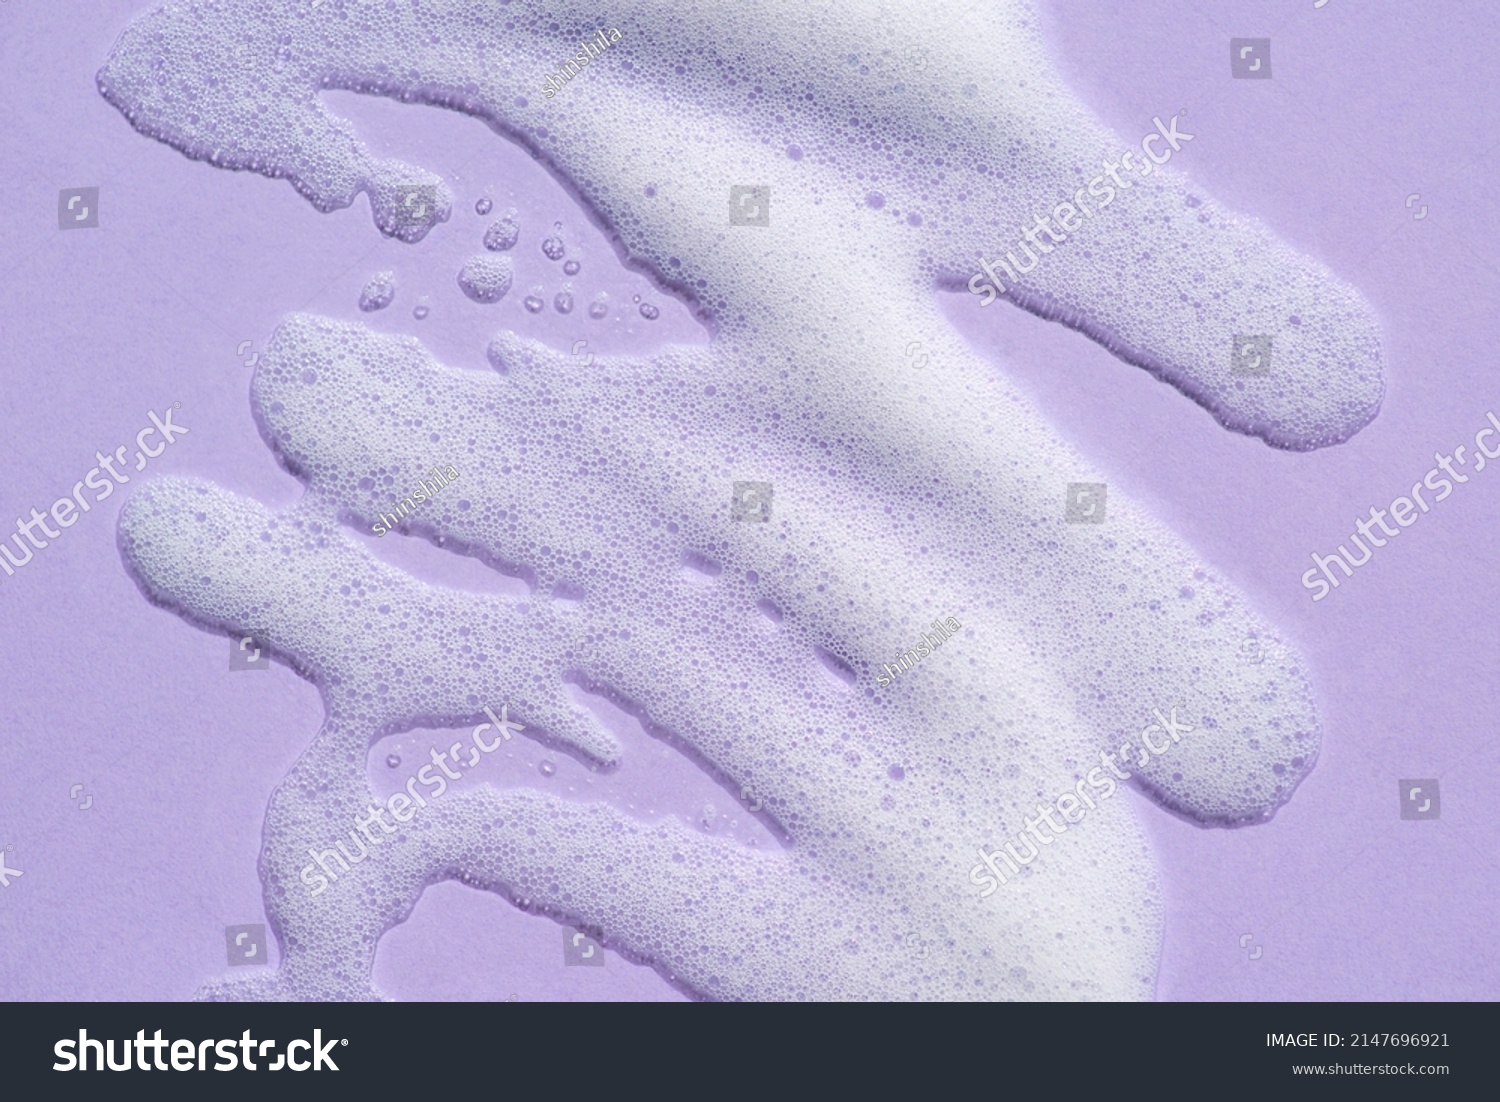 Foam swatch on a lilac background. Soapy liquid texture with bubbles. Natural sunshine and shadows. Skin care cleansing cosmetic in top view. #2147696921